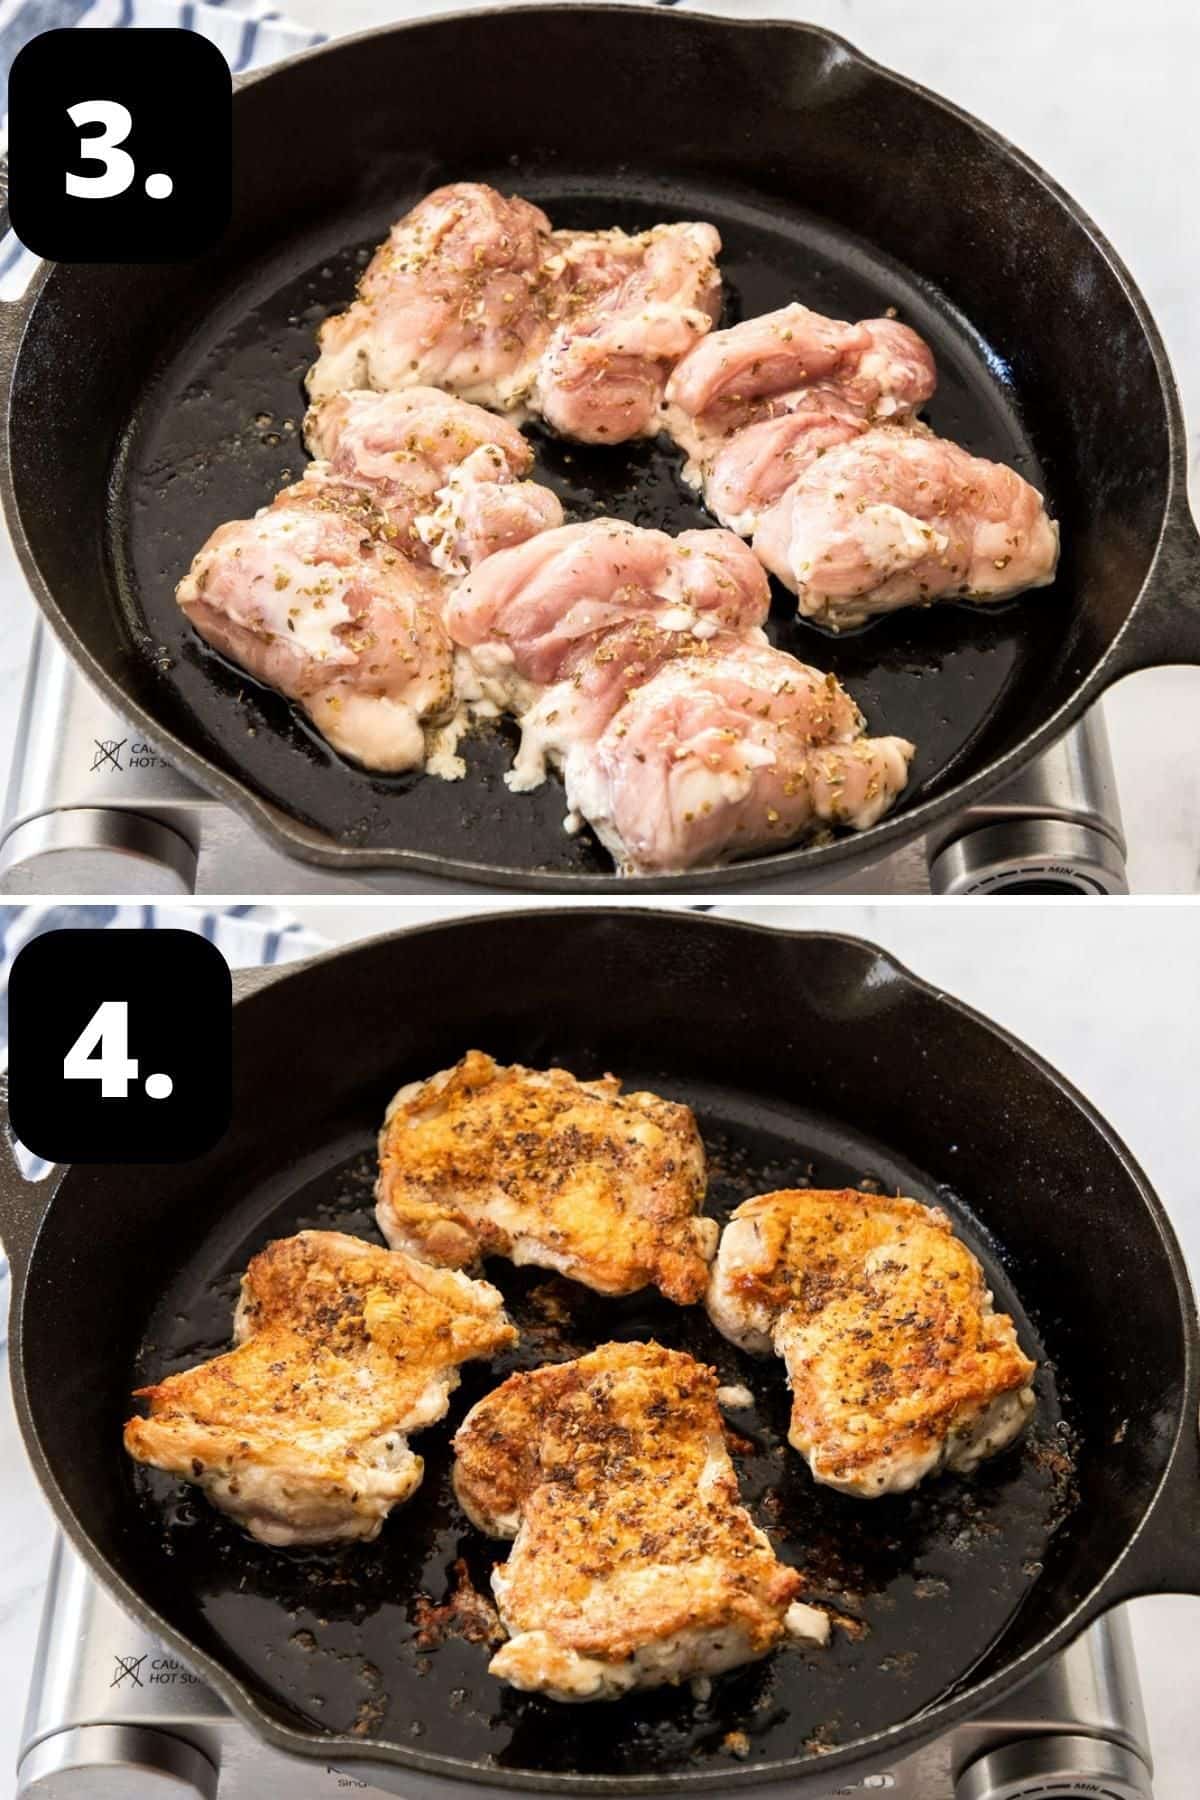 Steps 3-4 of preparing this recipe - the thighs skin side down in a cast iron skillet and turning to cook on the other side.